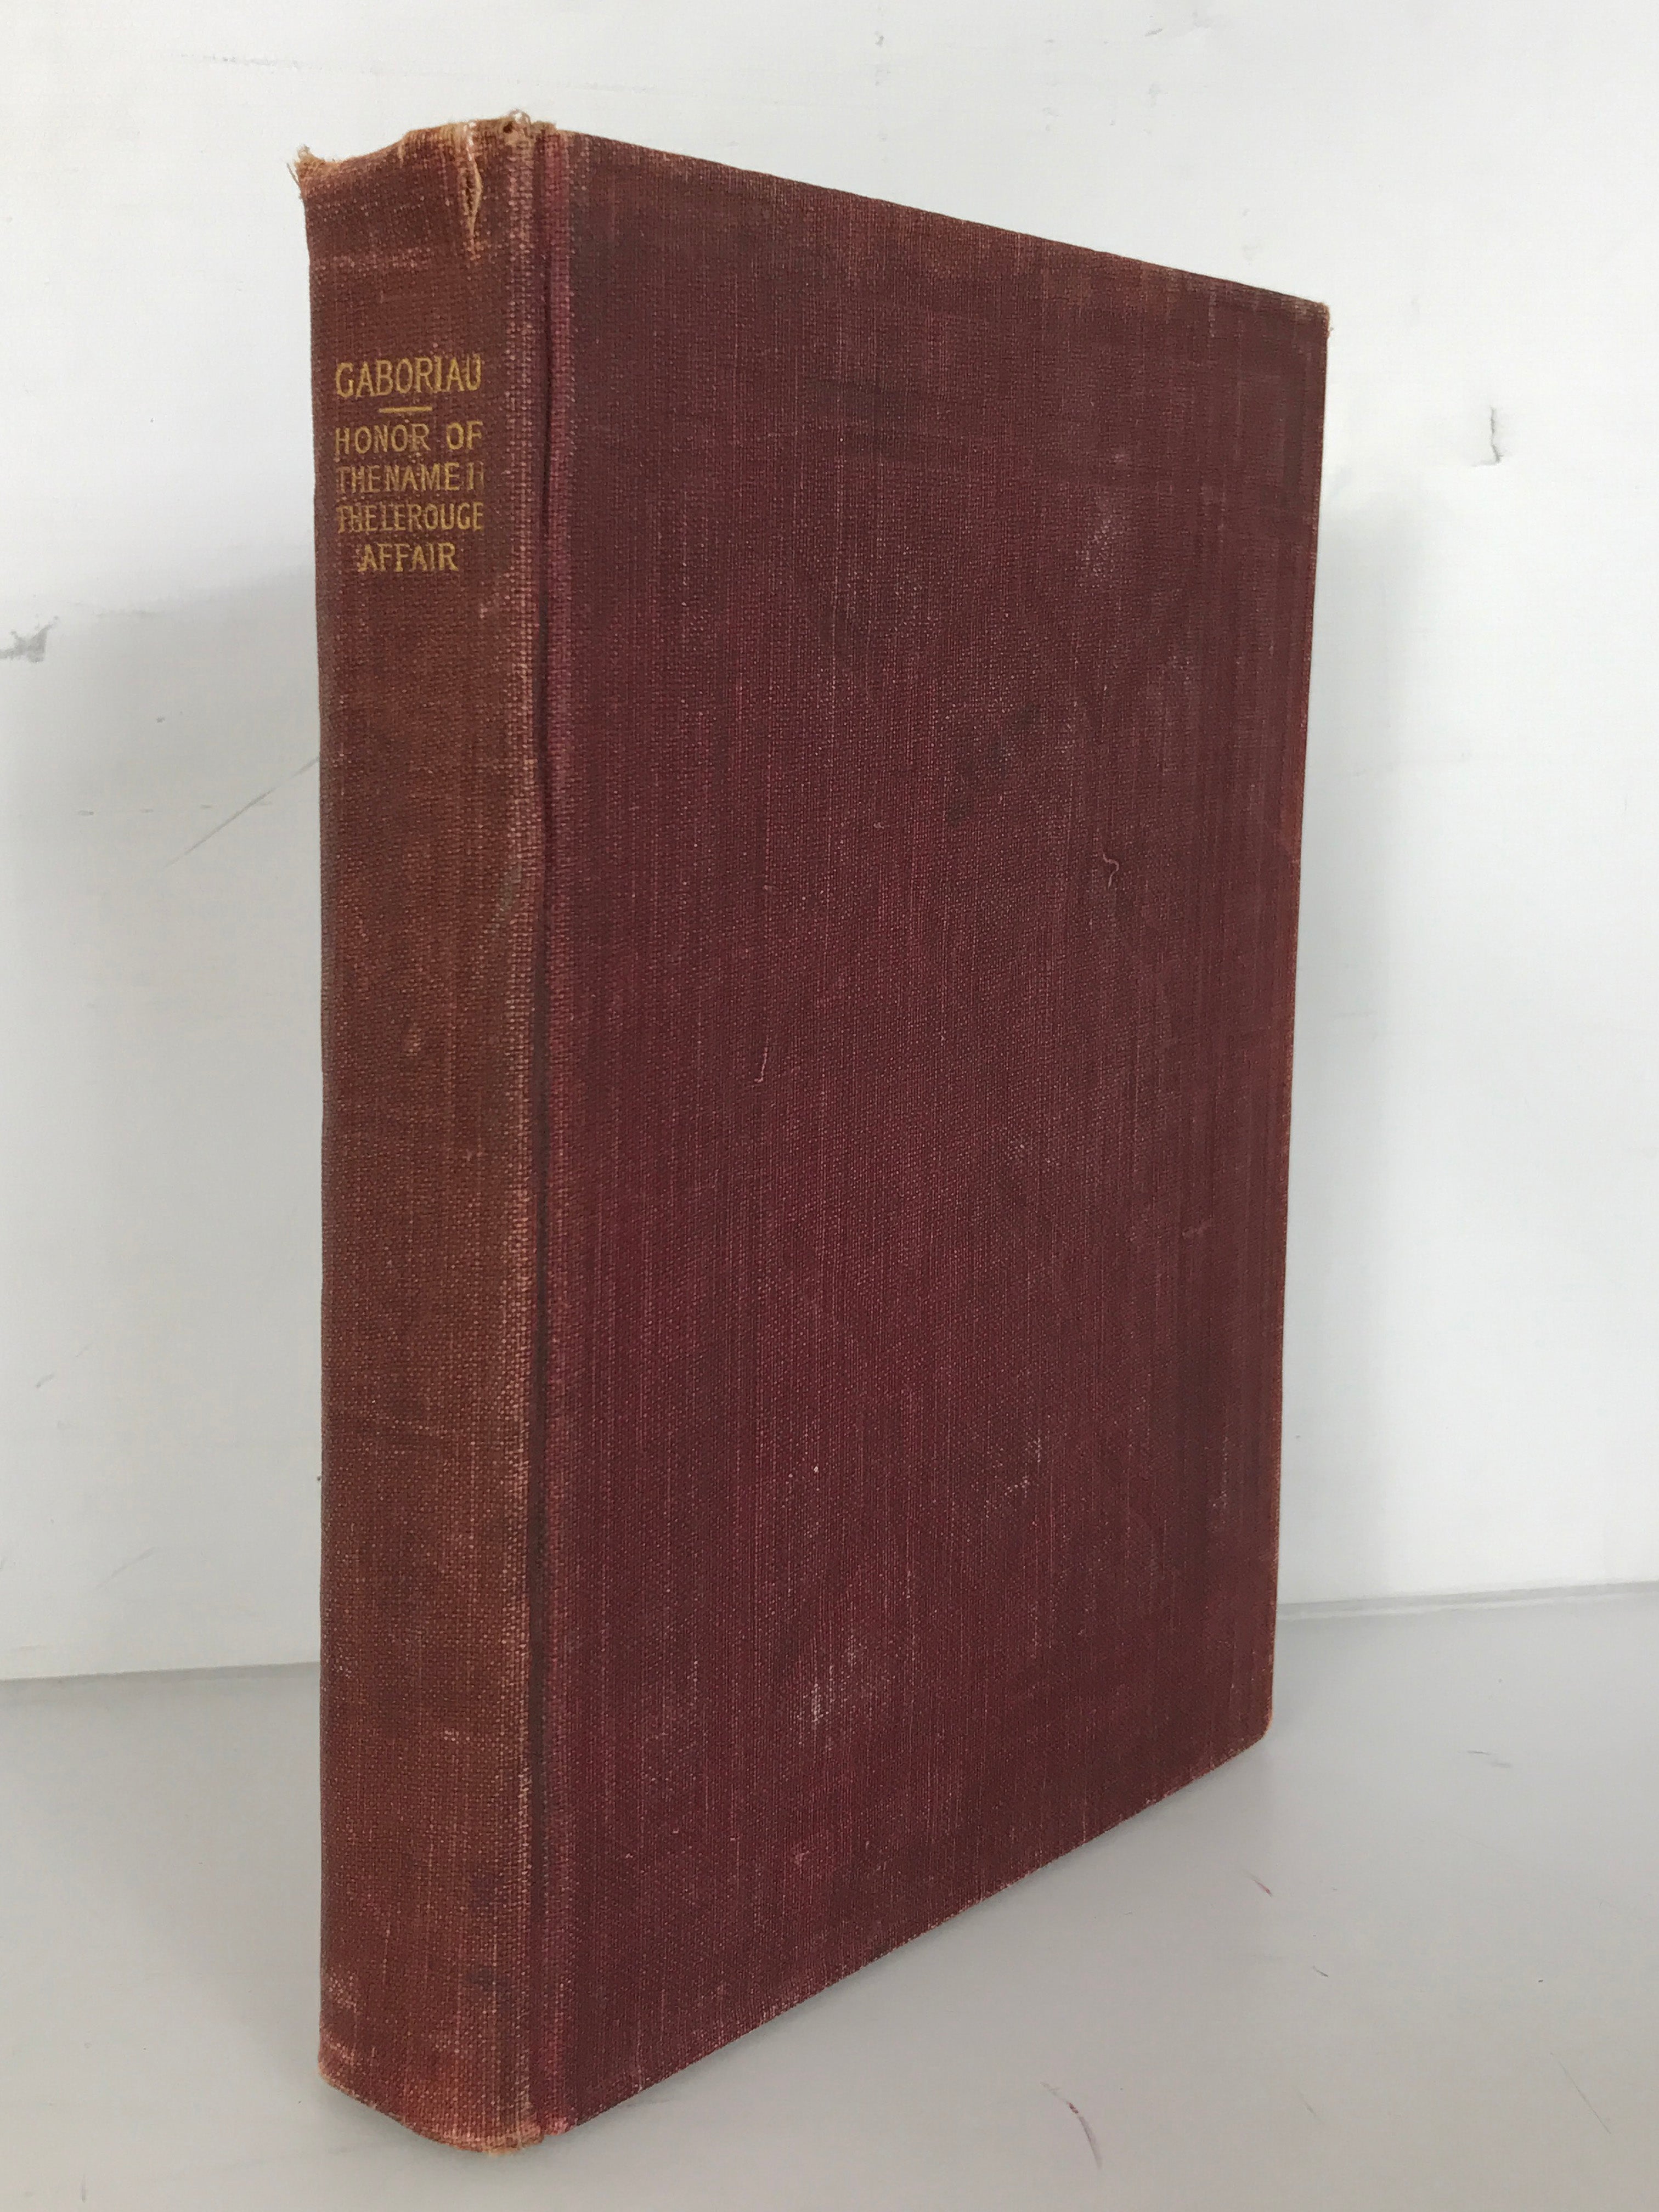 The Honor of the Name (Part II) and The Lerouge Affair by Emile Gaboriau 1908 HC